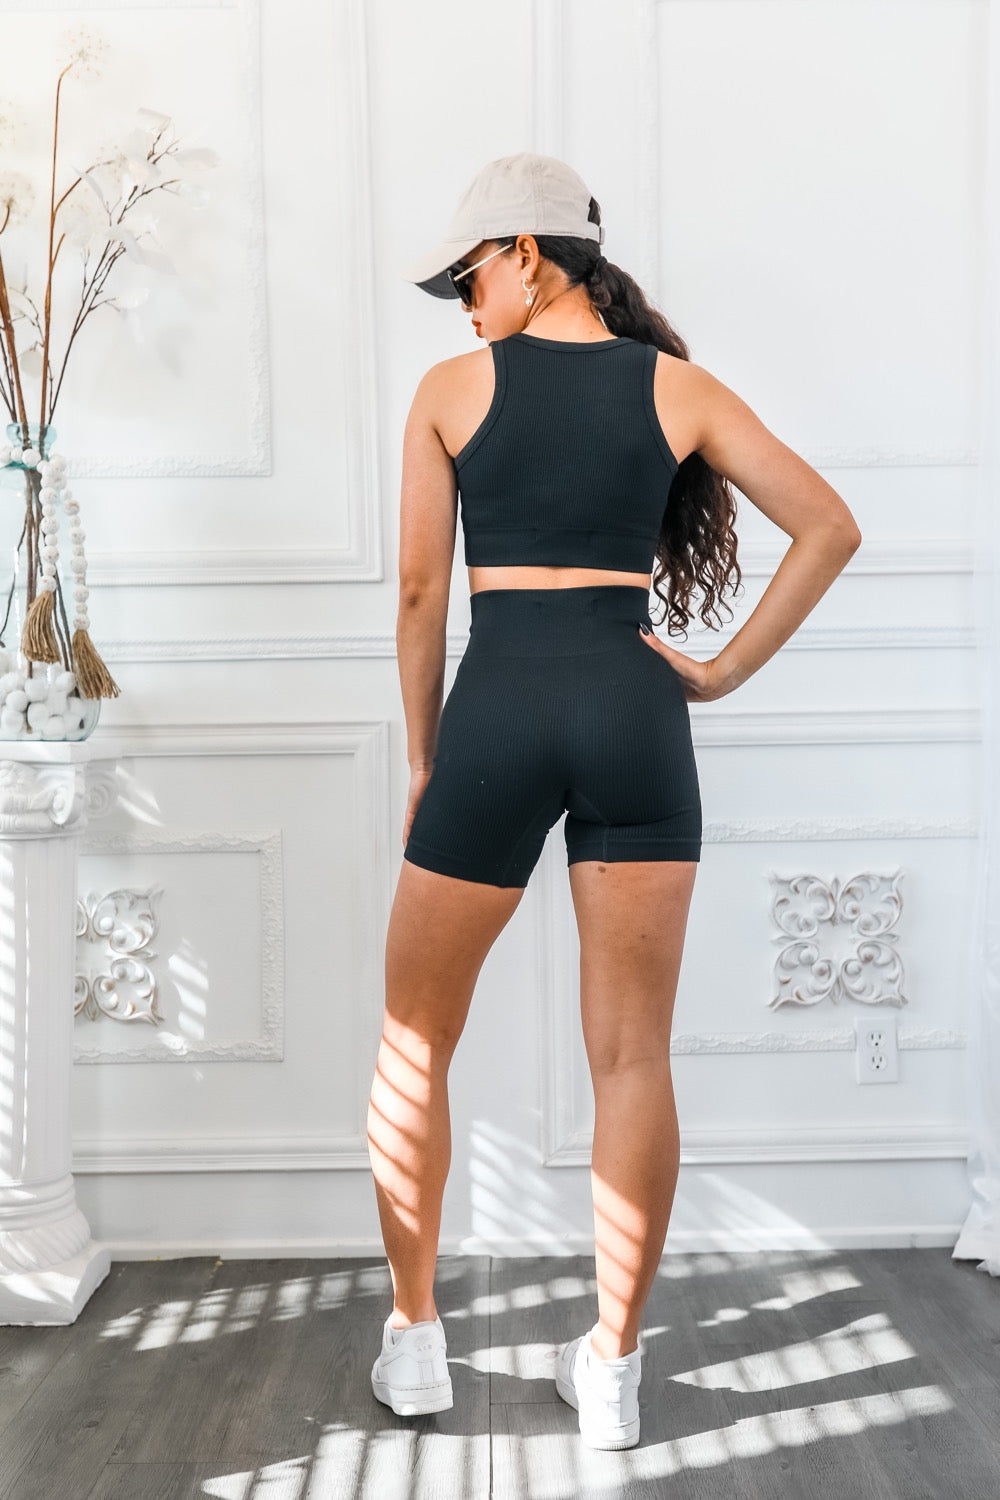 Next Level Ribbed Snatched Active Wear Shorts Set - High Quality Fabric, Body Contouring, Perfect for Workouts and Yoga